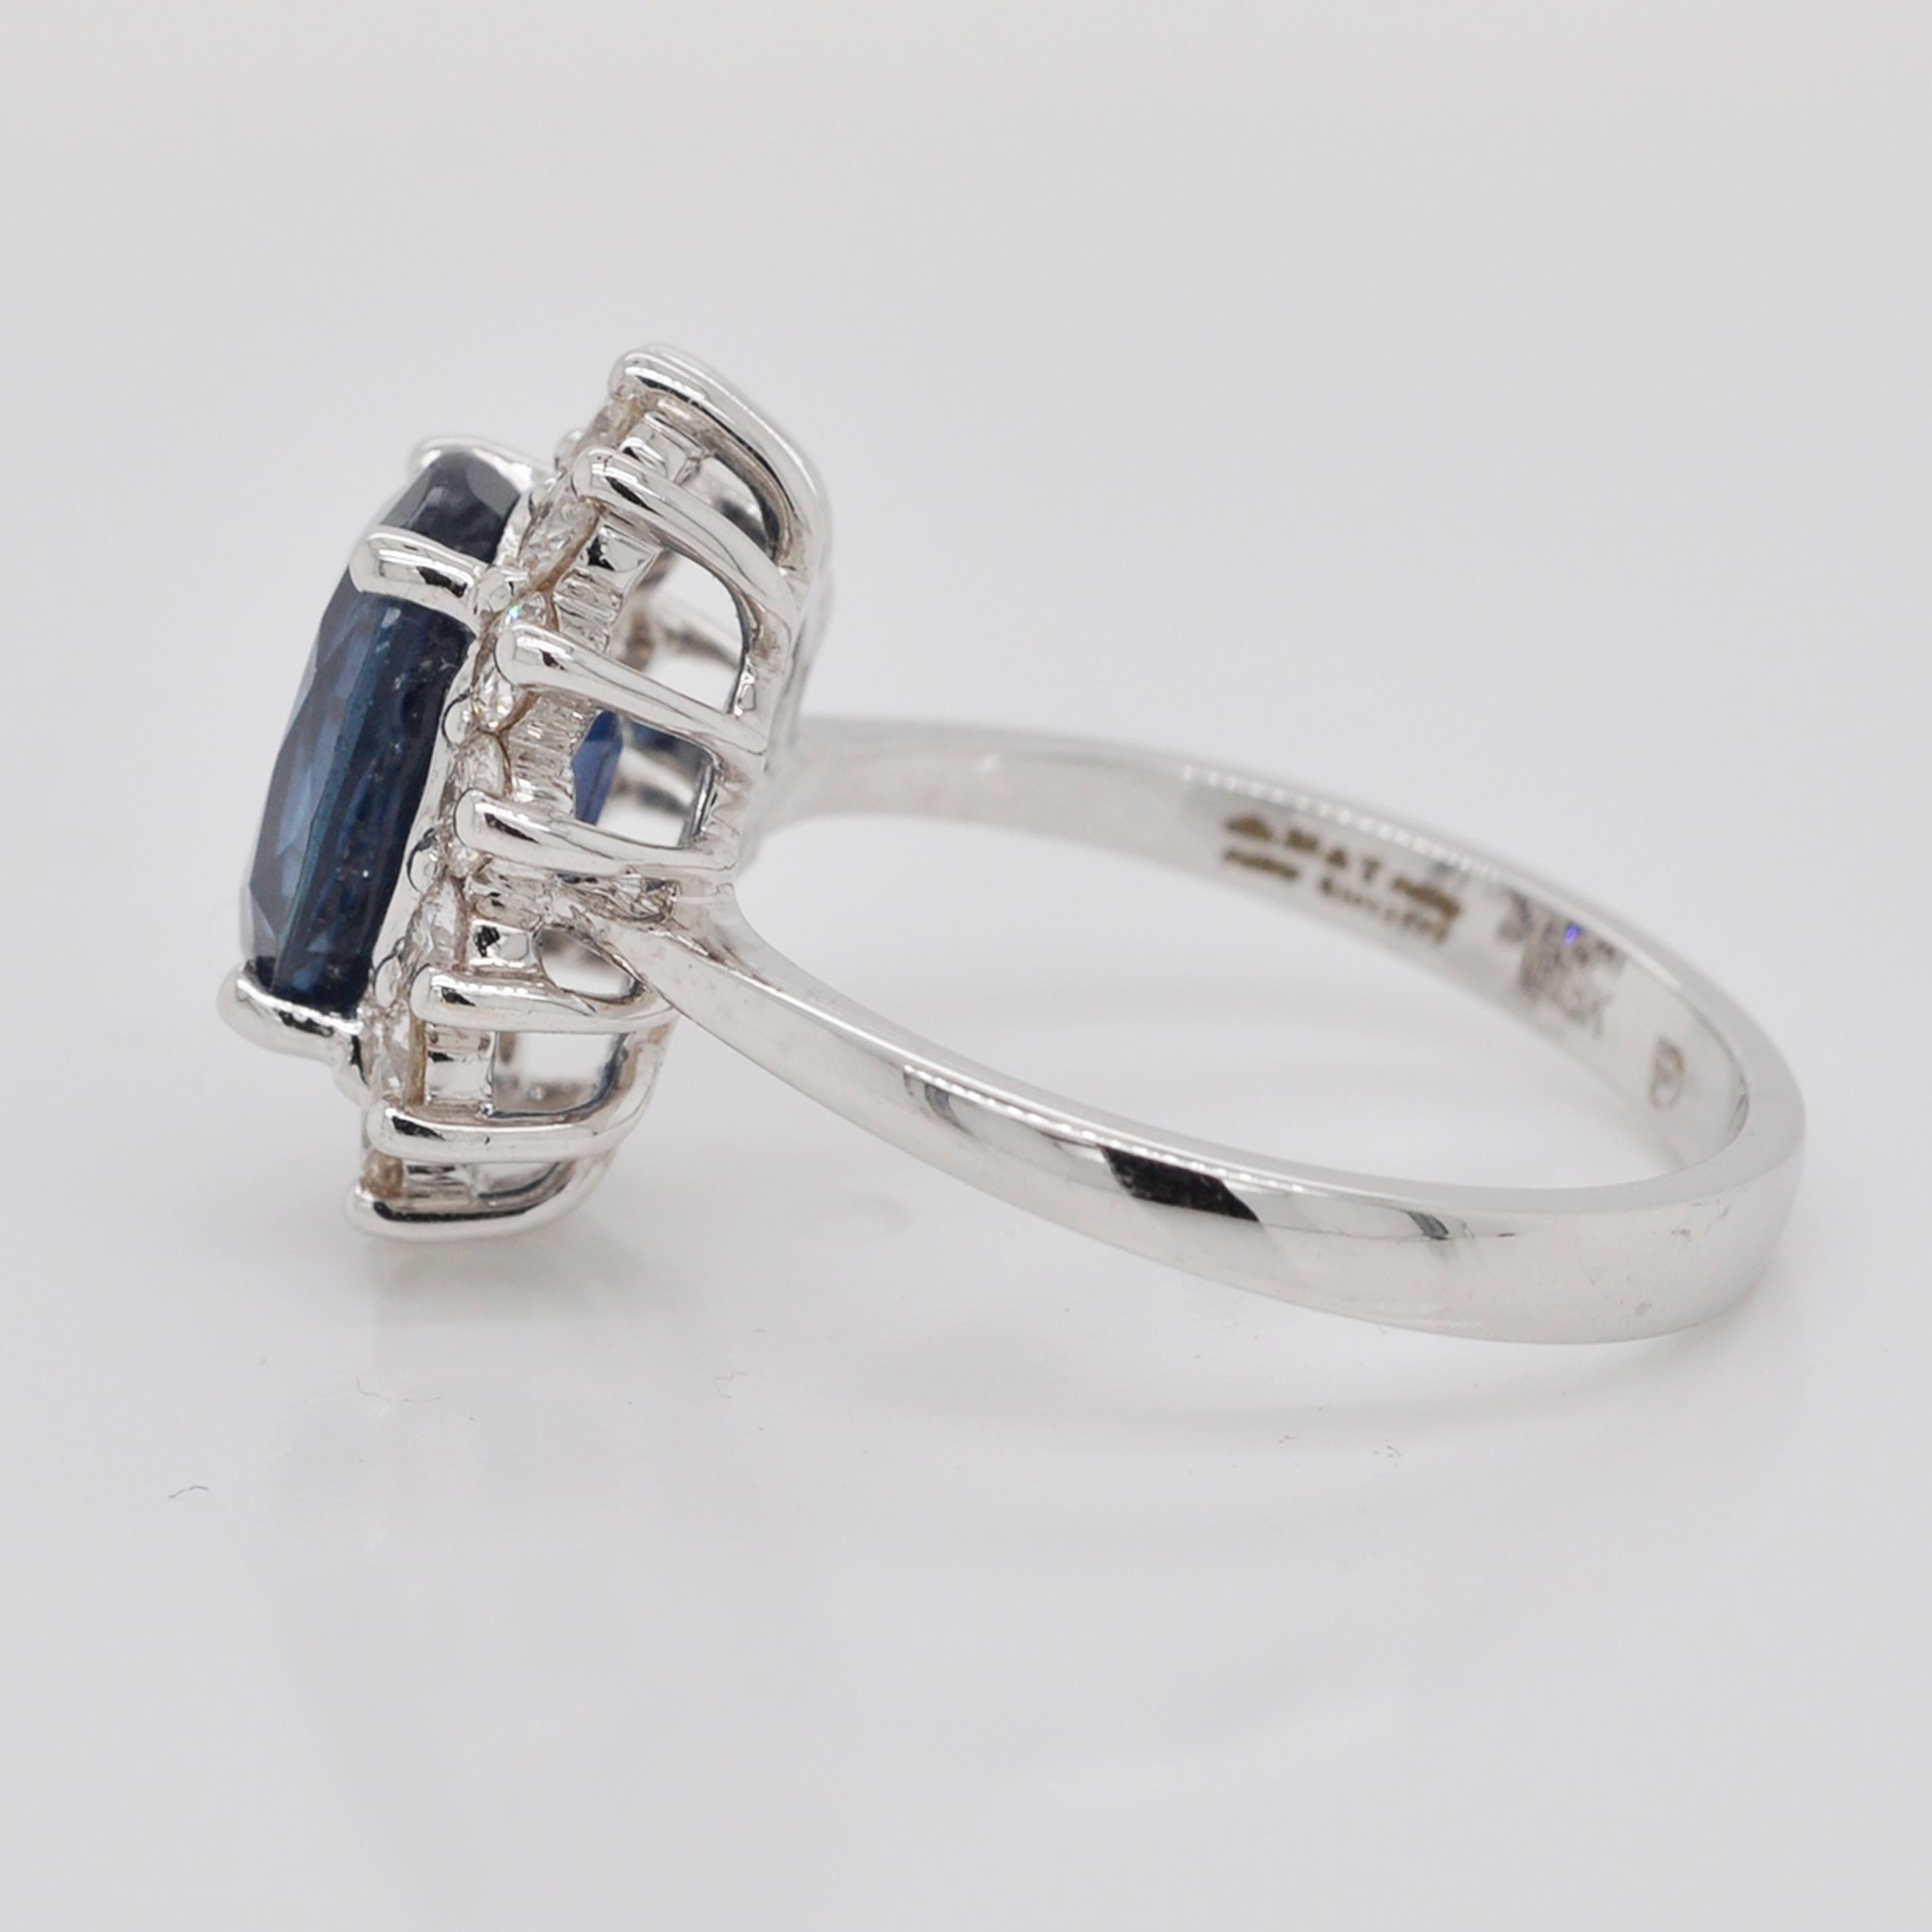 18 Karat White Gold Certified Oval Blue Sapphire Diamond Engagement Ring For Sale 2